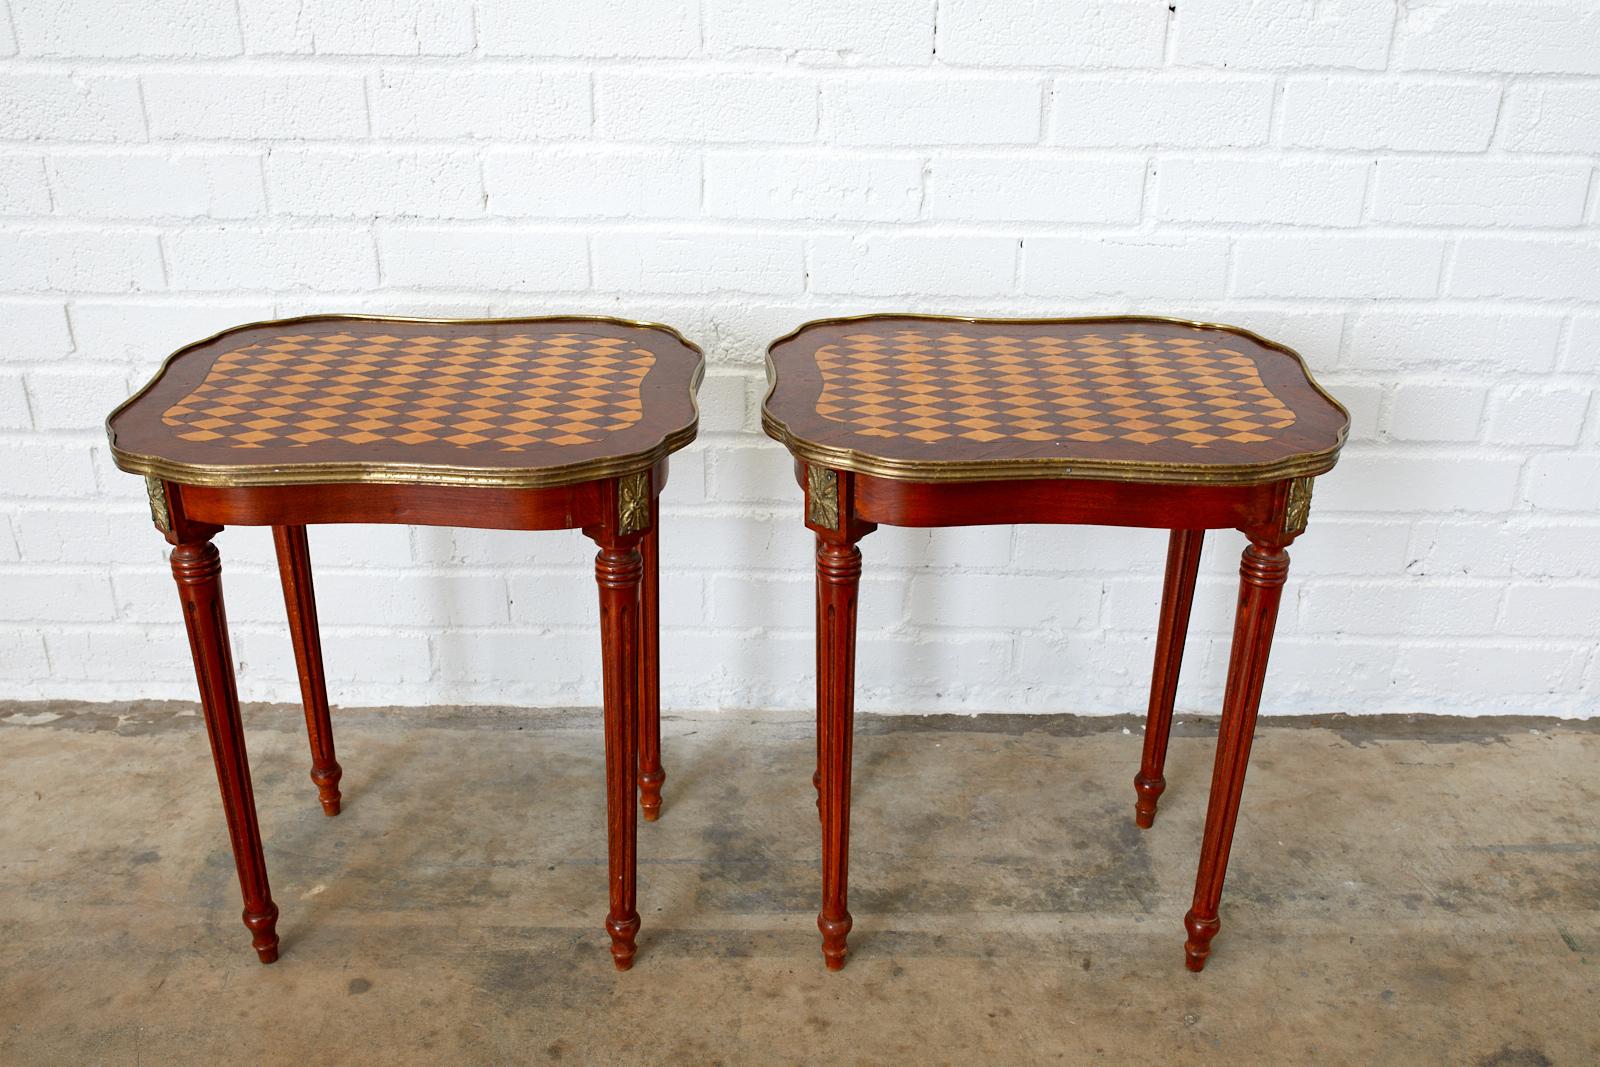 Impressive pair of French drink tables or side tables featuring a marquetry inlay top with diamond harlequin pattern design. Beautifully crafted with a bronze mounted galleried edge with reeded detail. The tables have scalloped edges with a